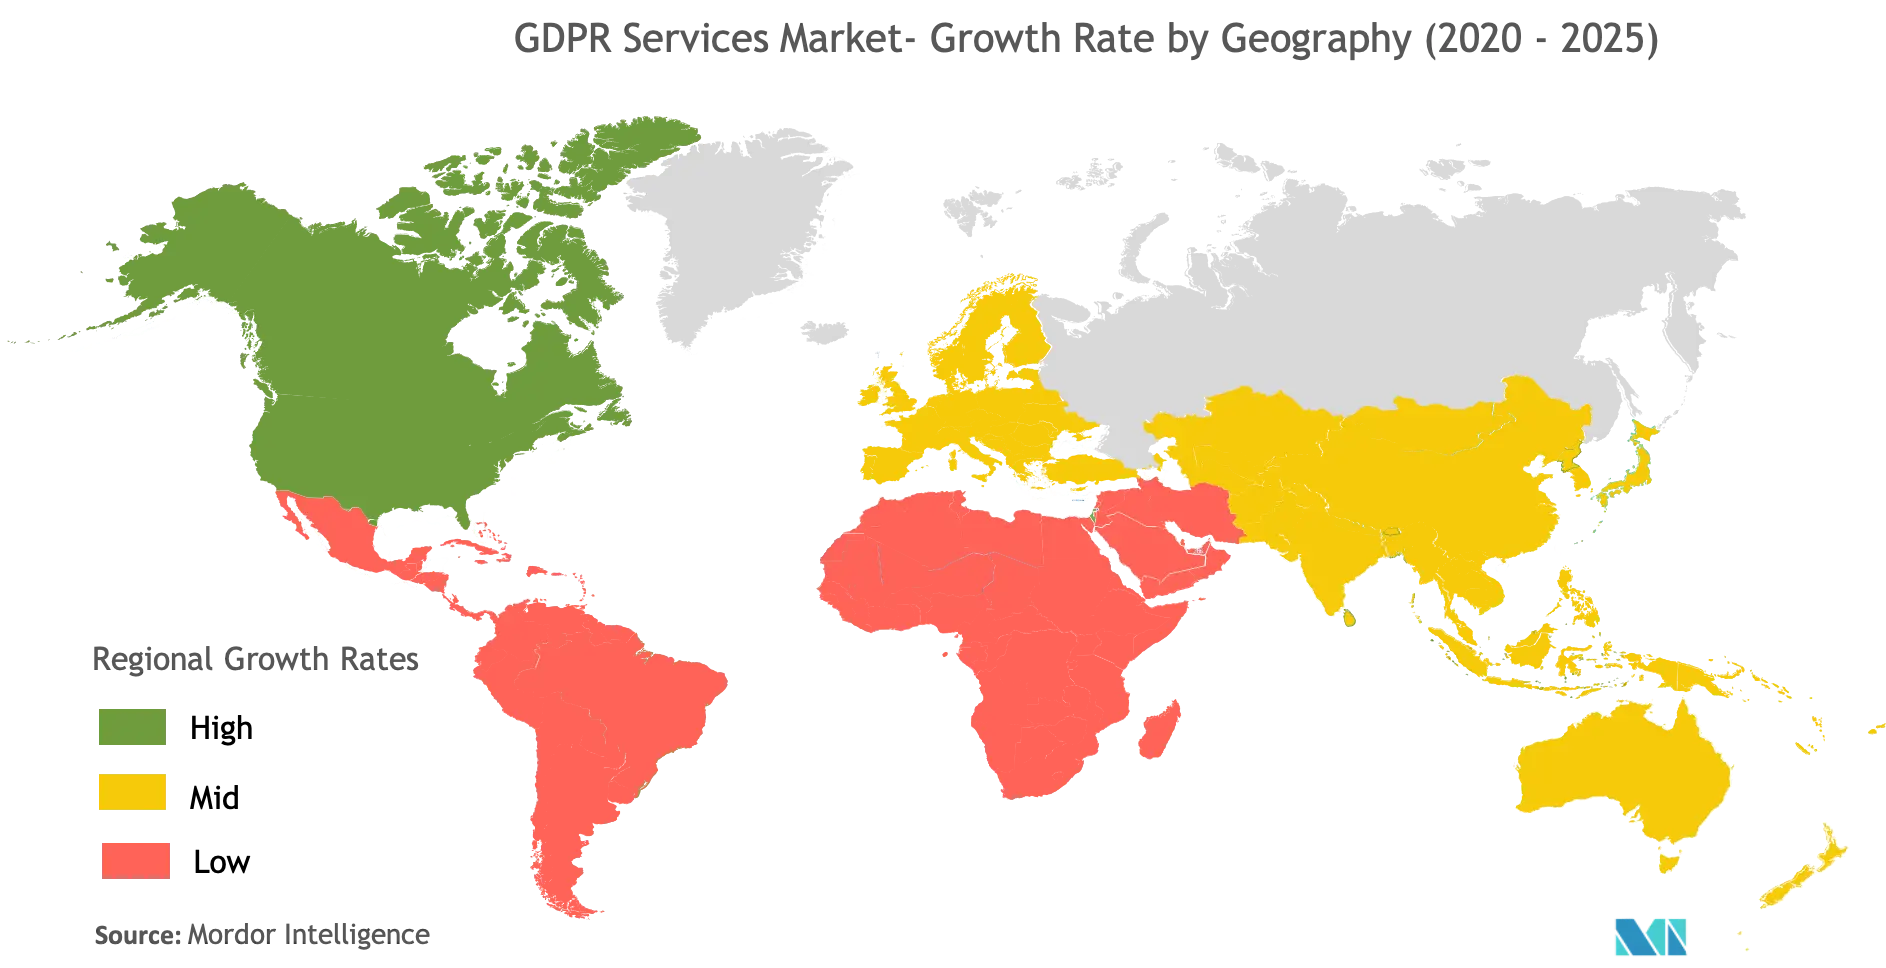 GDPR Services Market - Growth Rate by Geography (2020 - 2025)